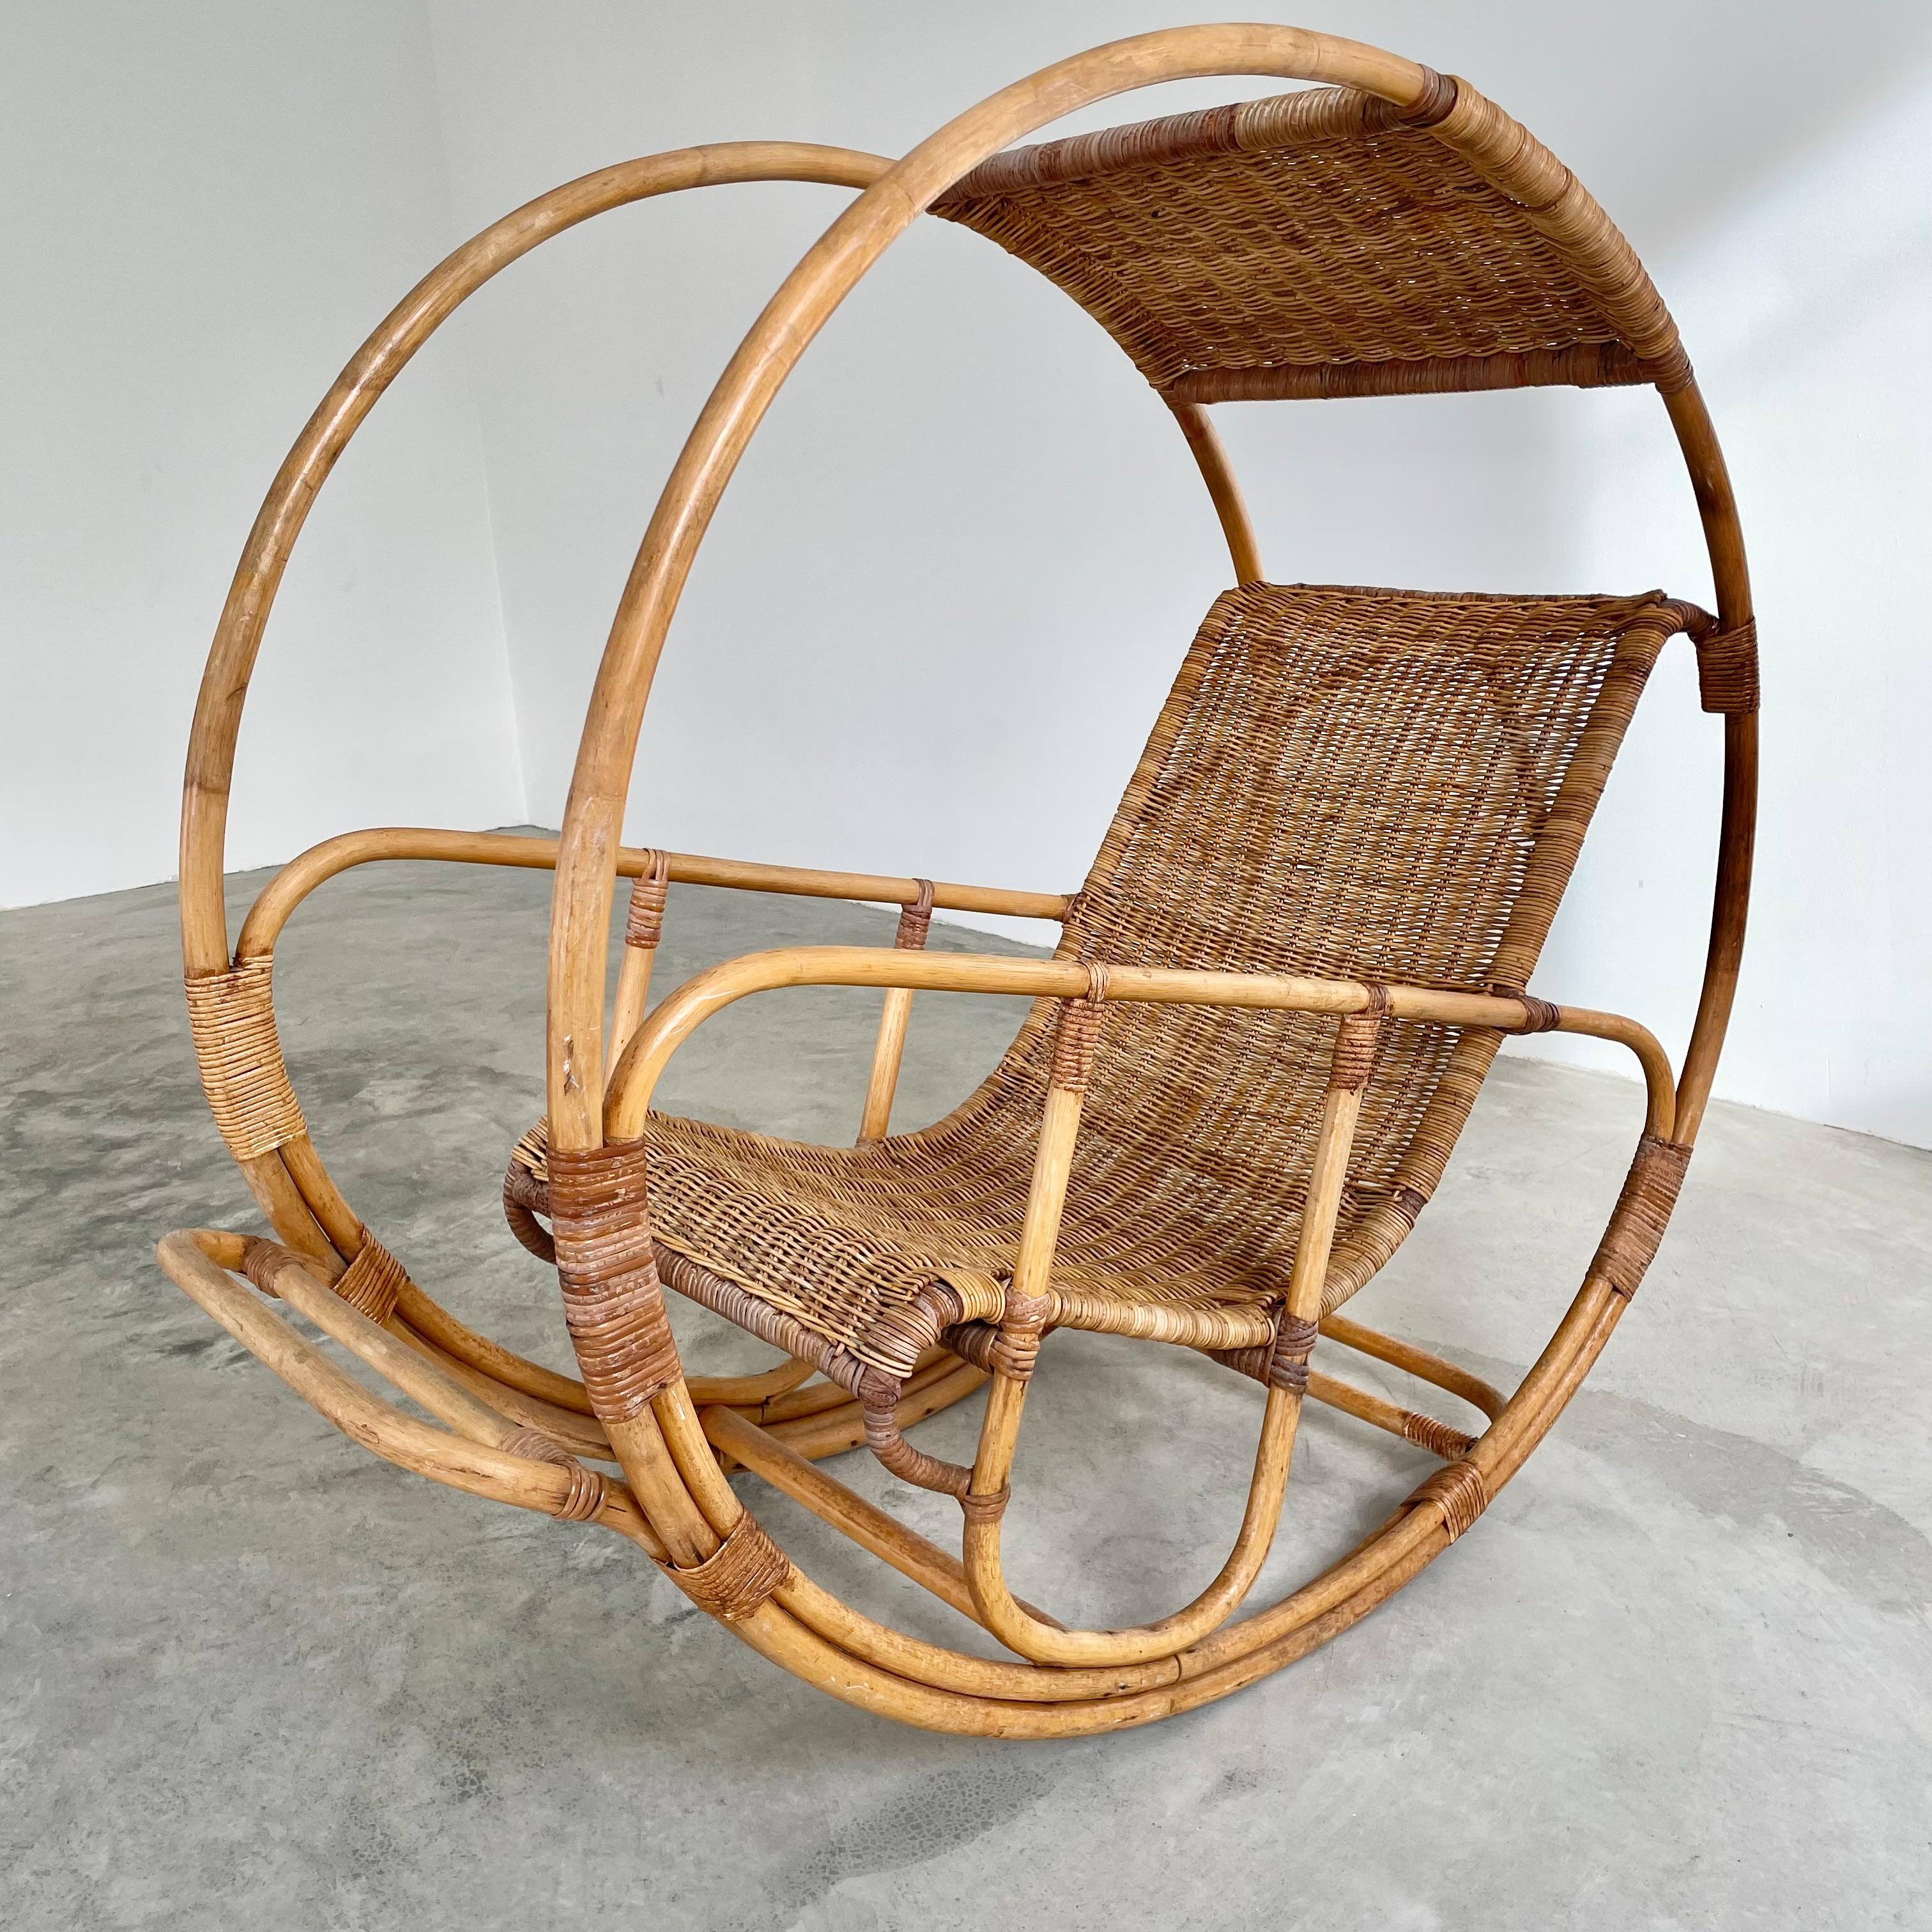 Stunning rattan rocking chair inspired by Franco Bettonica and the space age of the 1960s. He sought to create a chair using traditional natural materials but bending and weaving them into futuristic shapes. This chair features a bamboo wheel frame